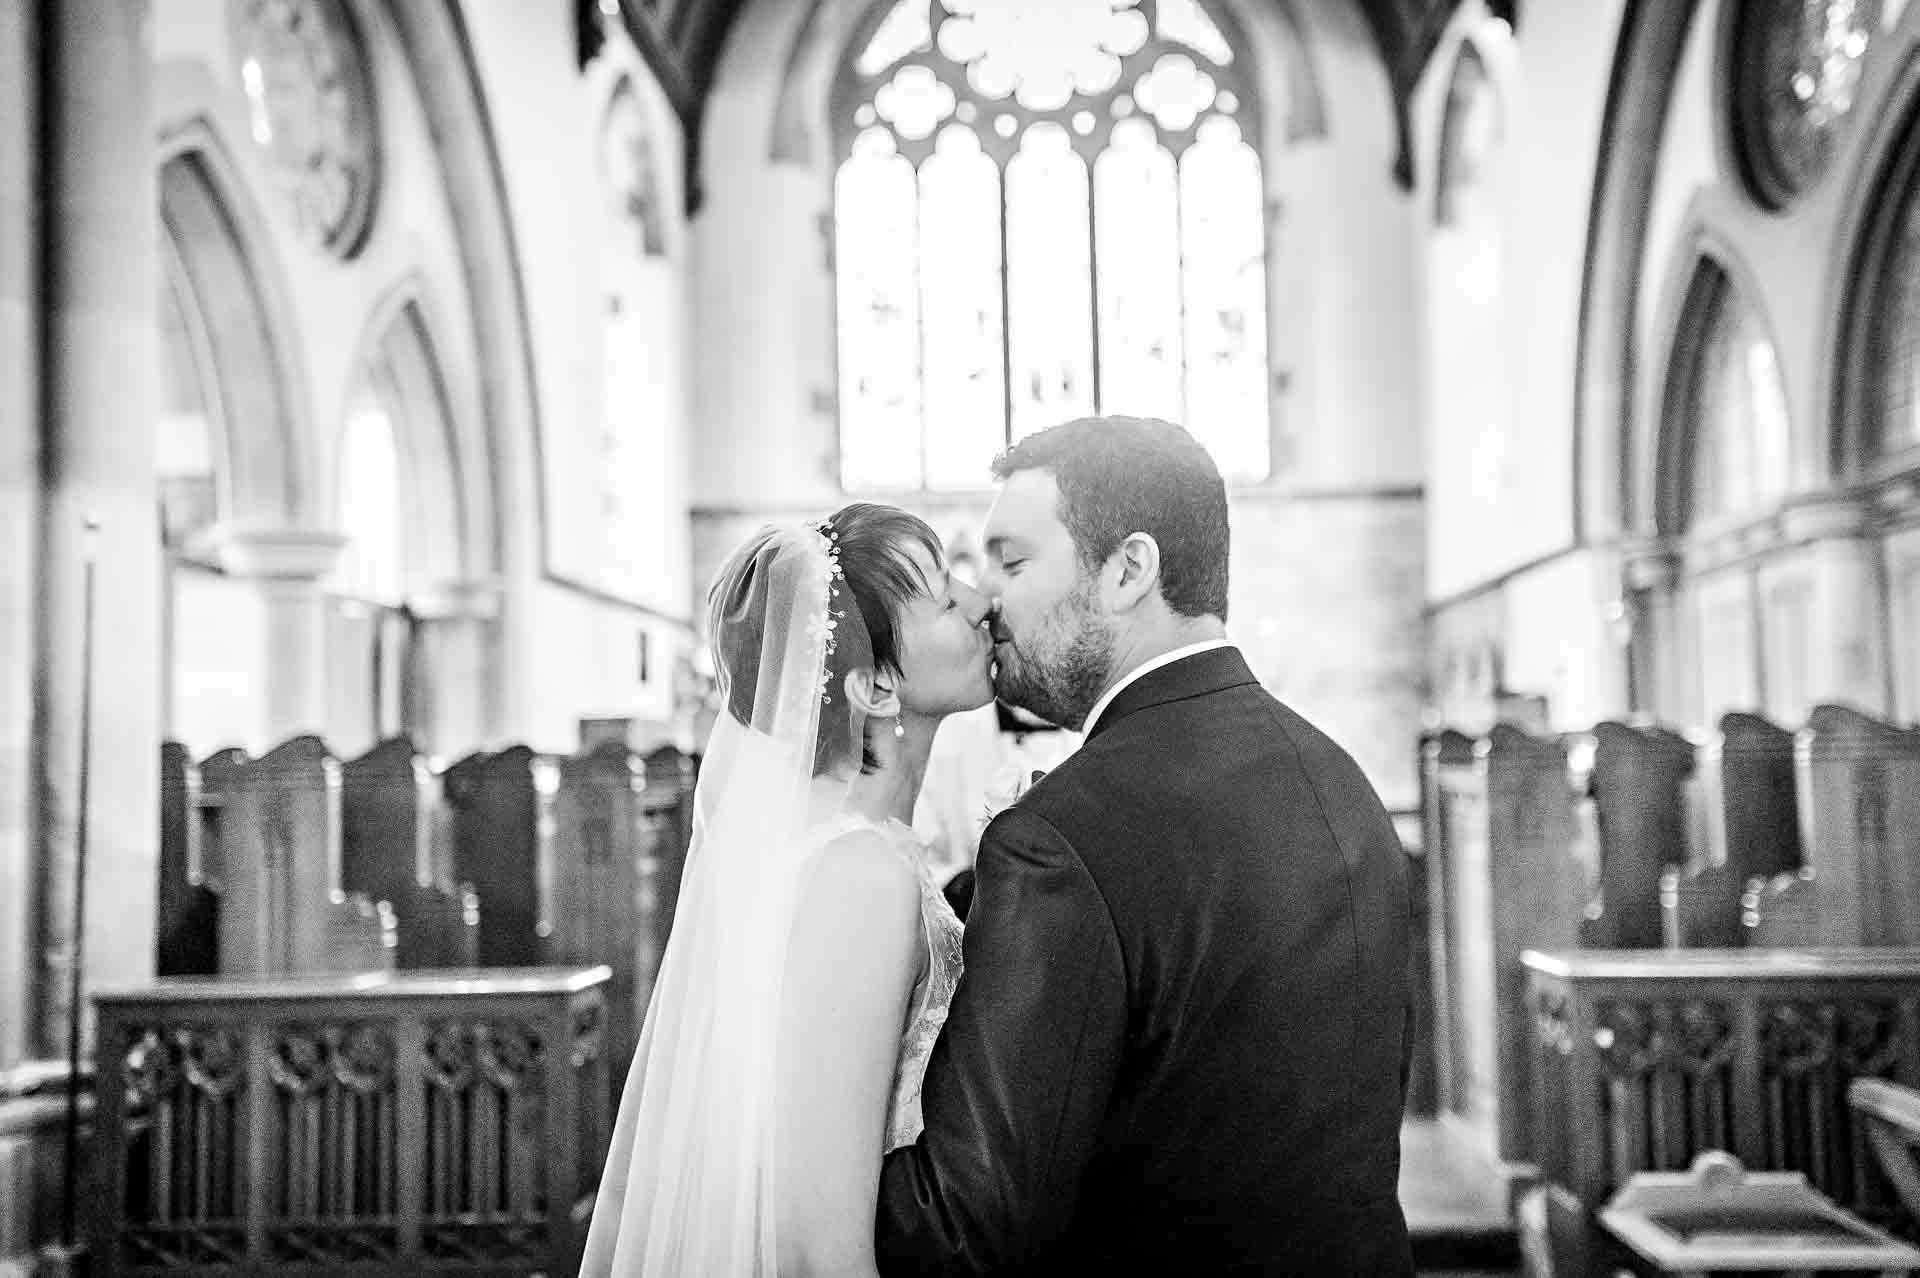 First Kiss at St Martins Church in Caerphilly